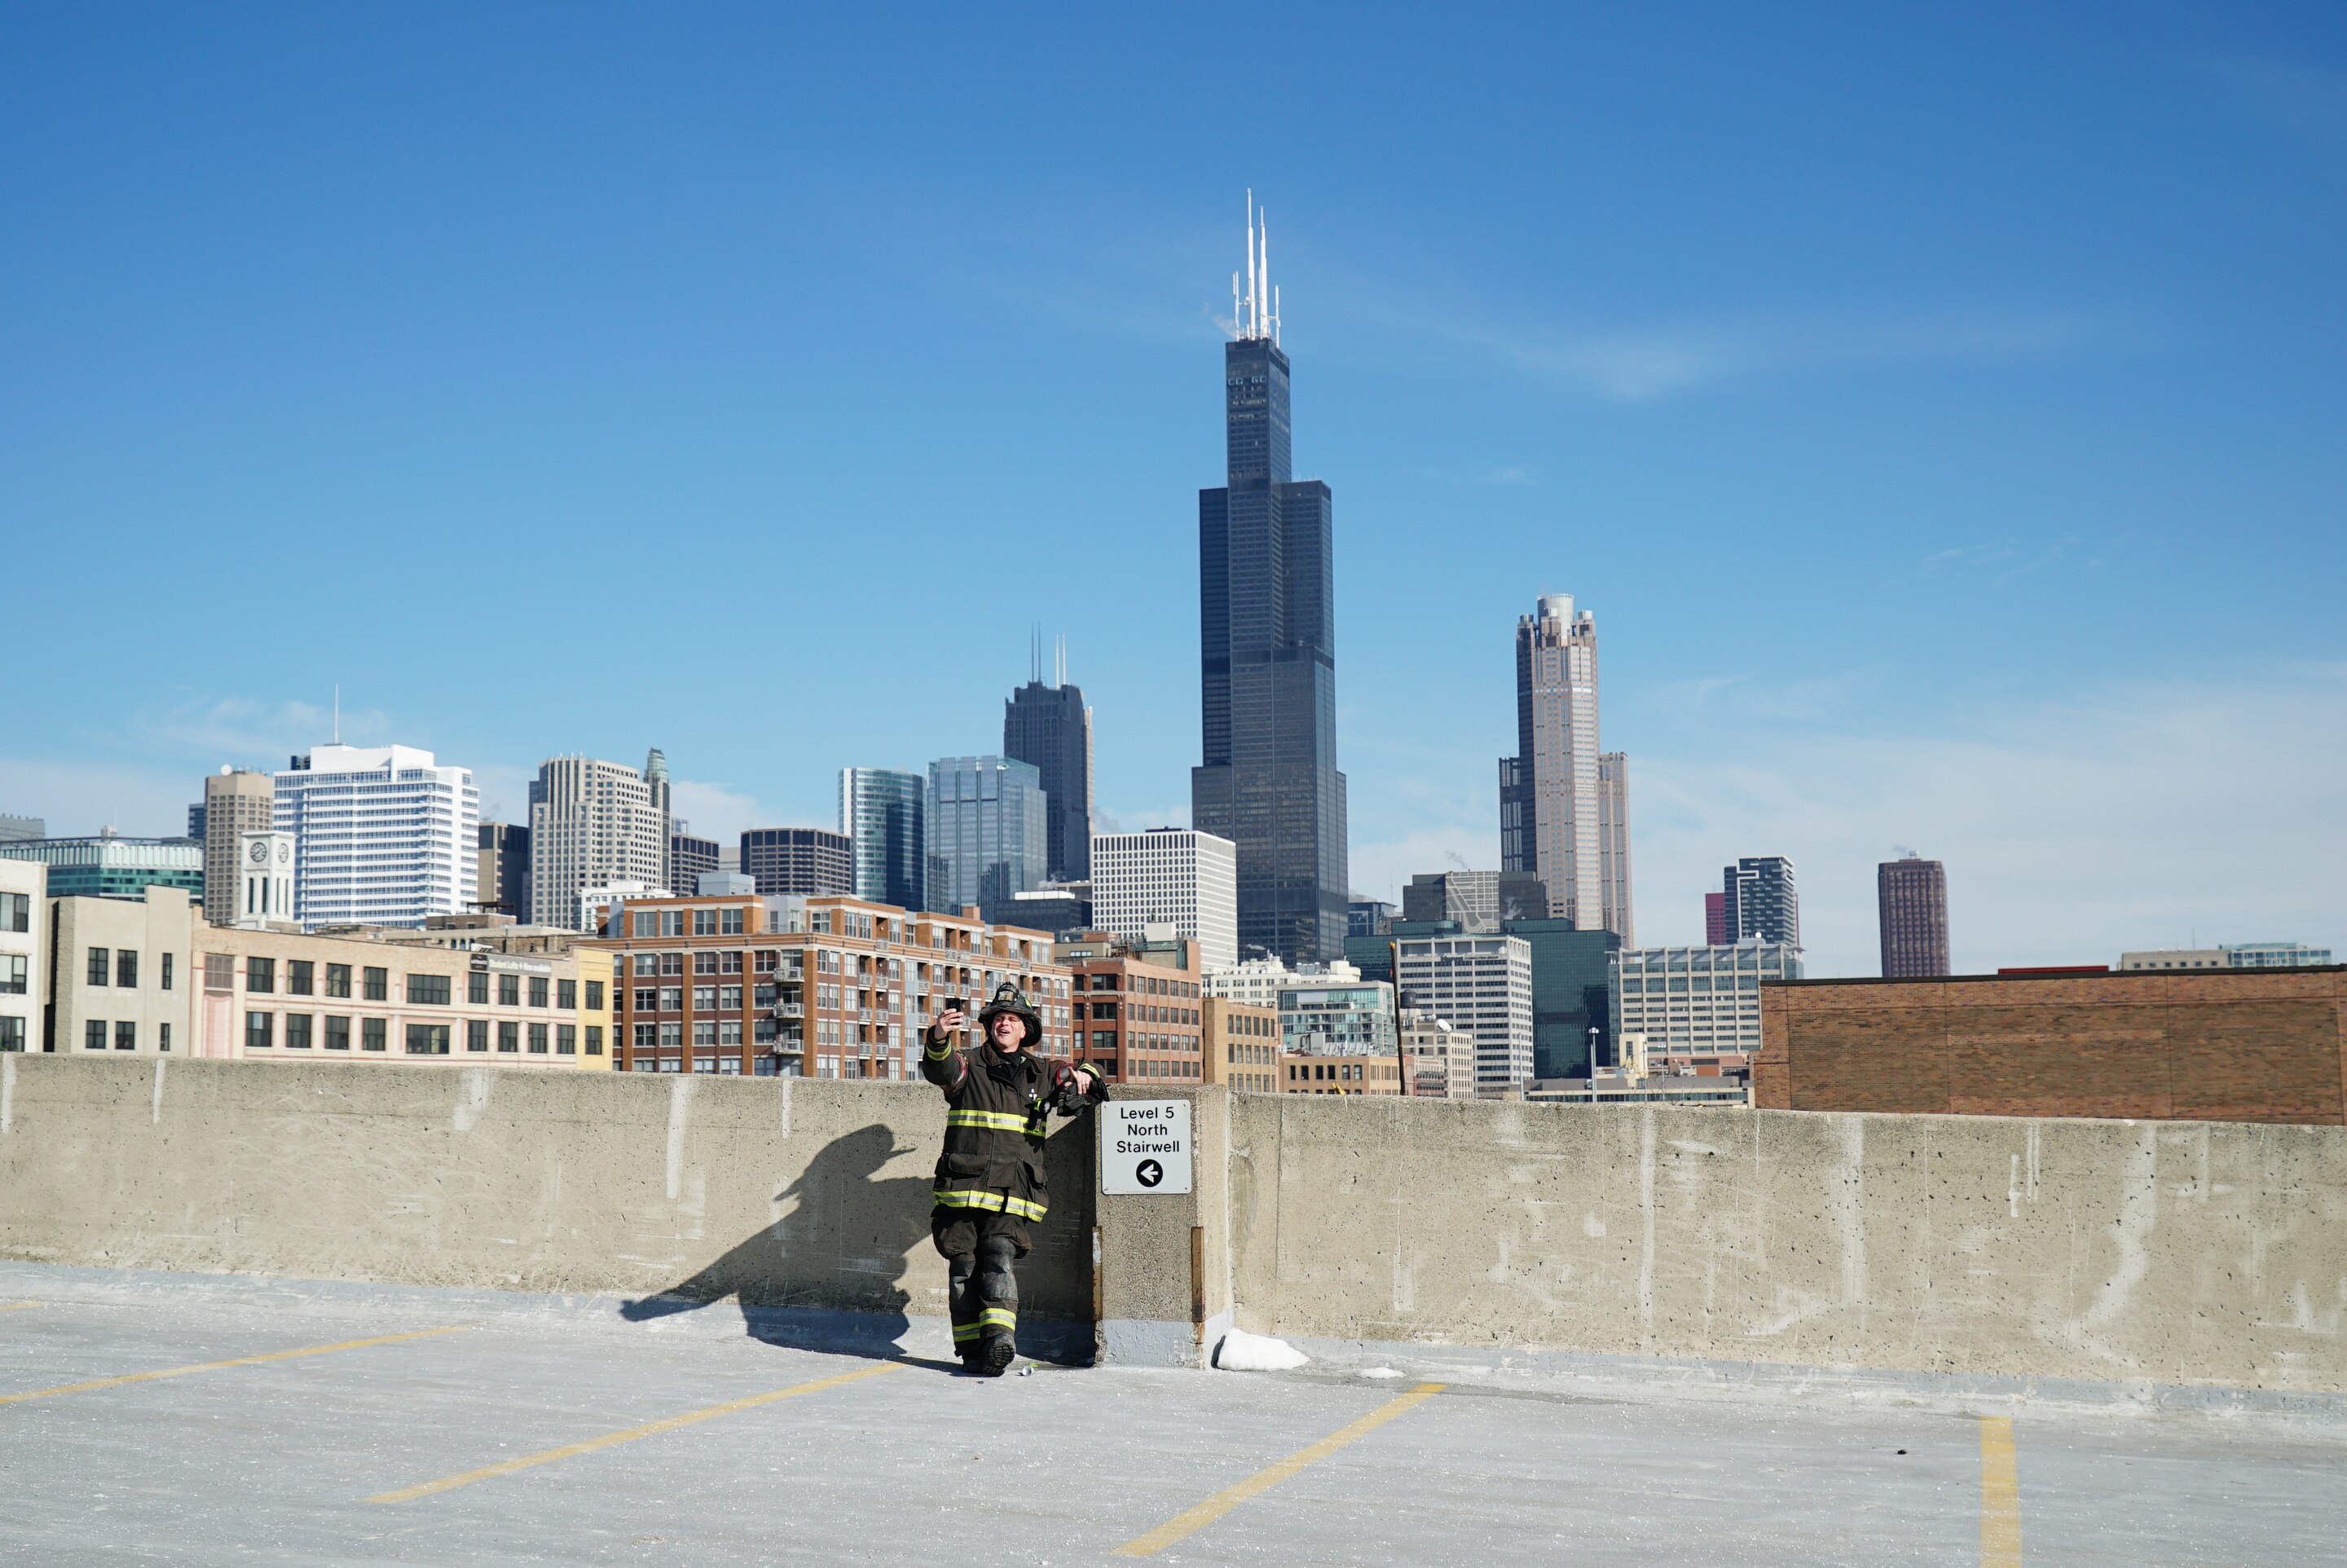 chicago fire places to visit